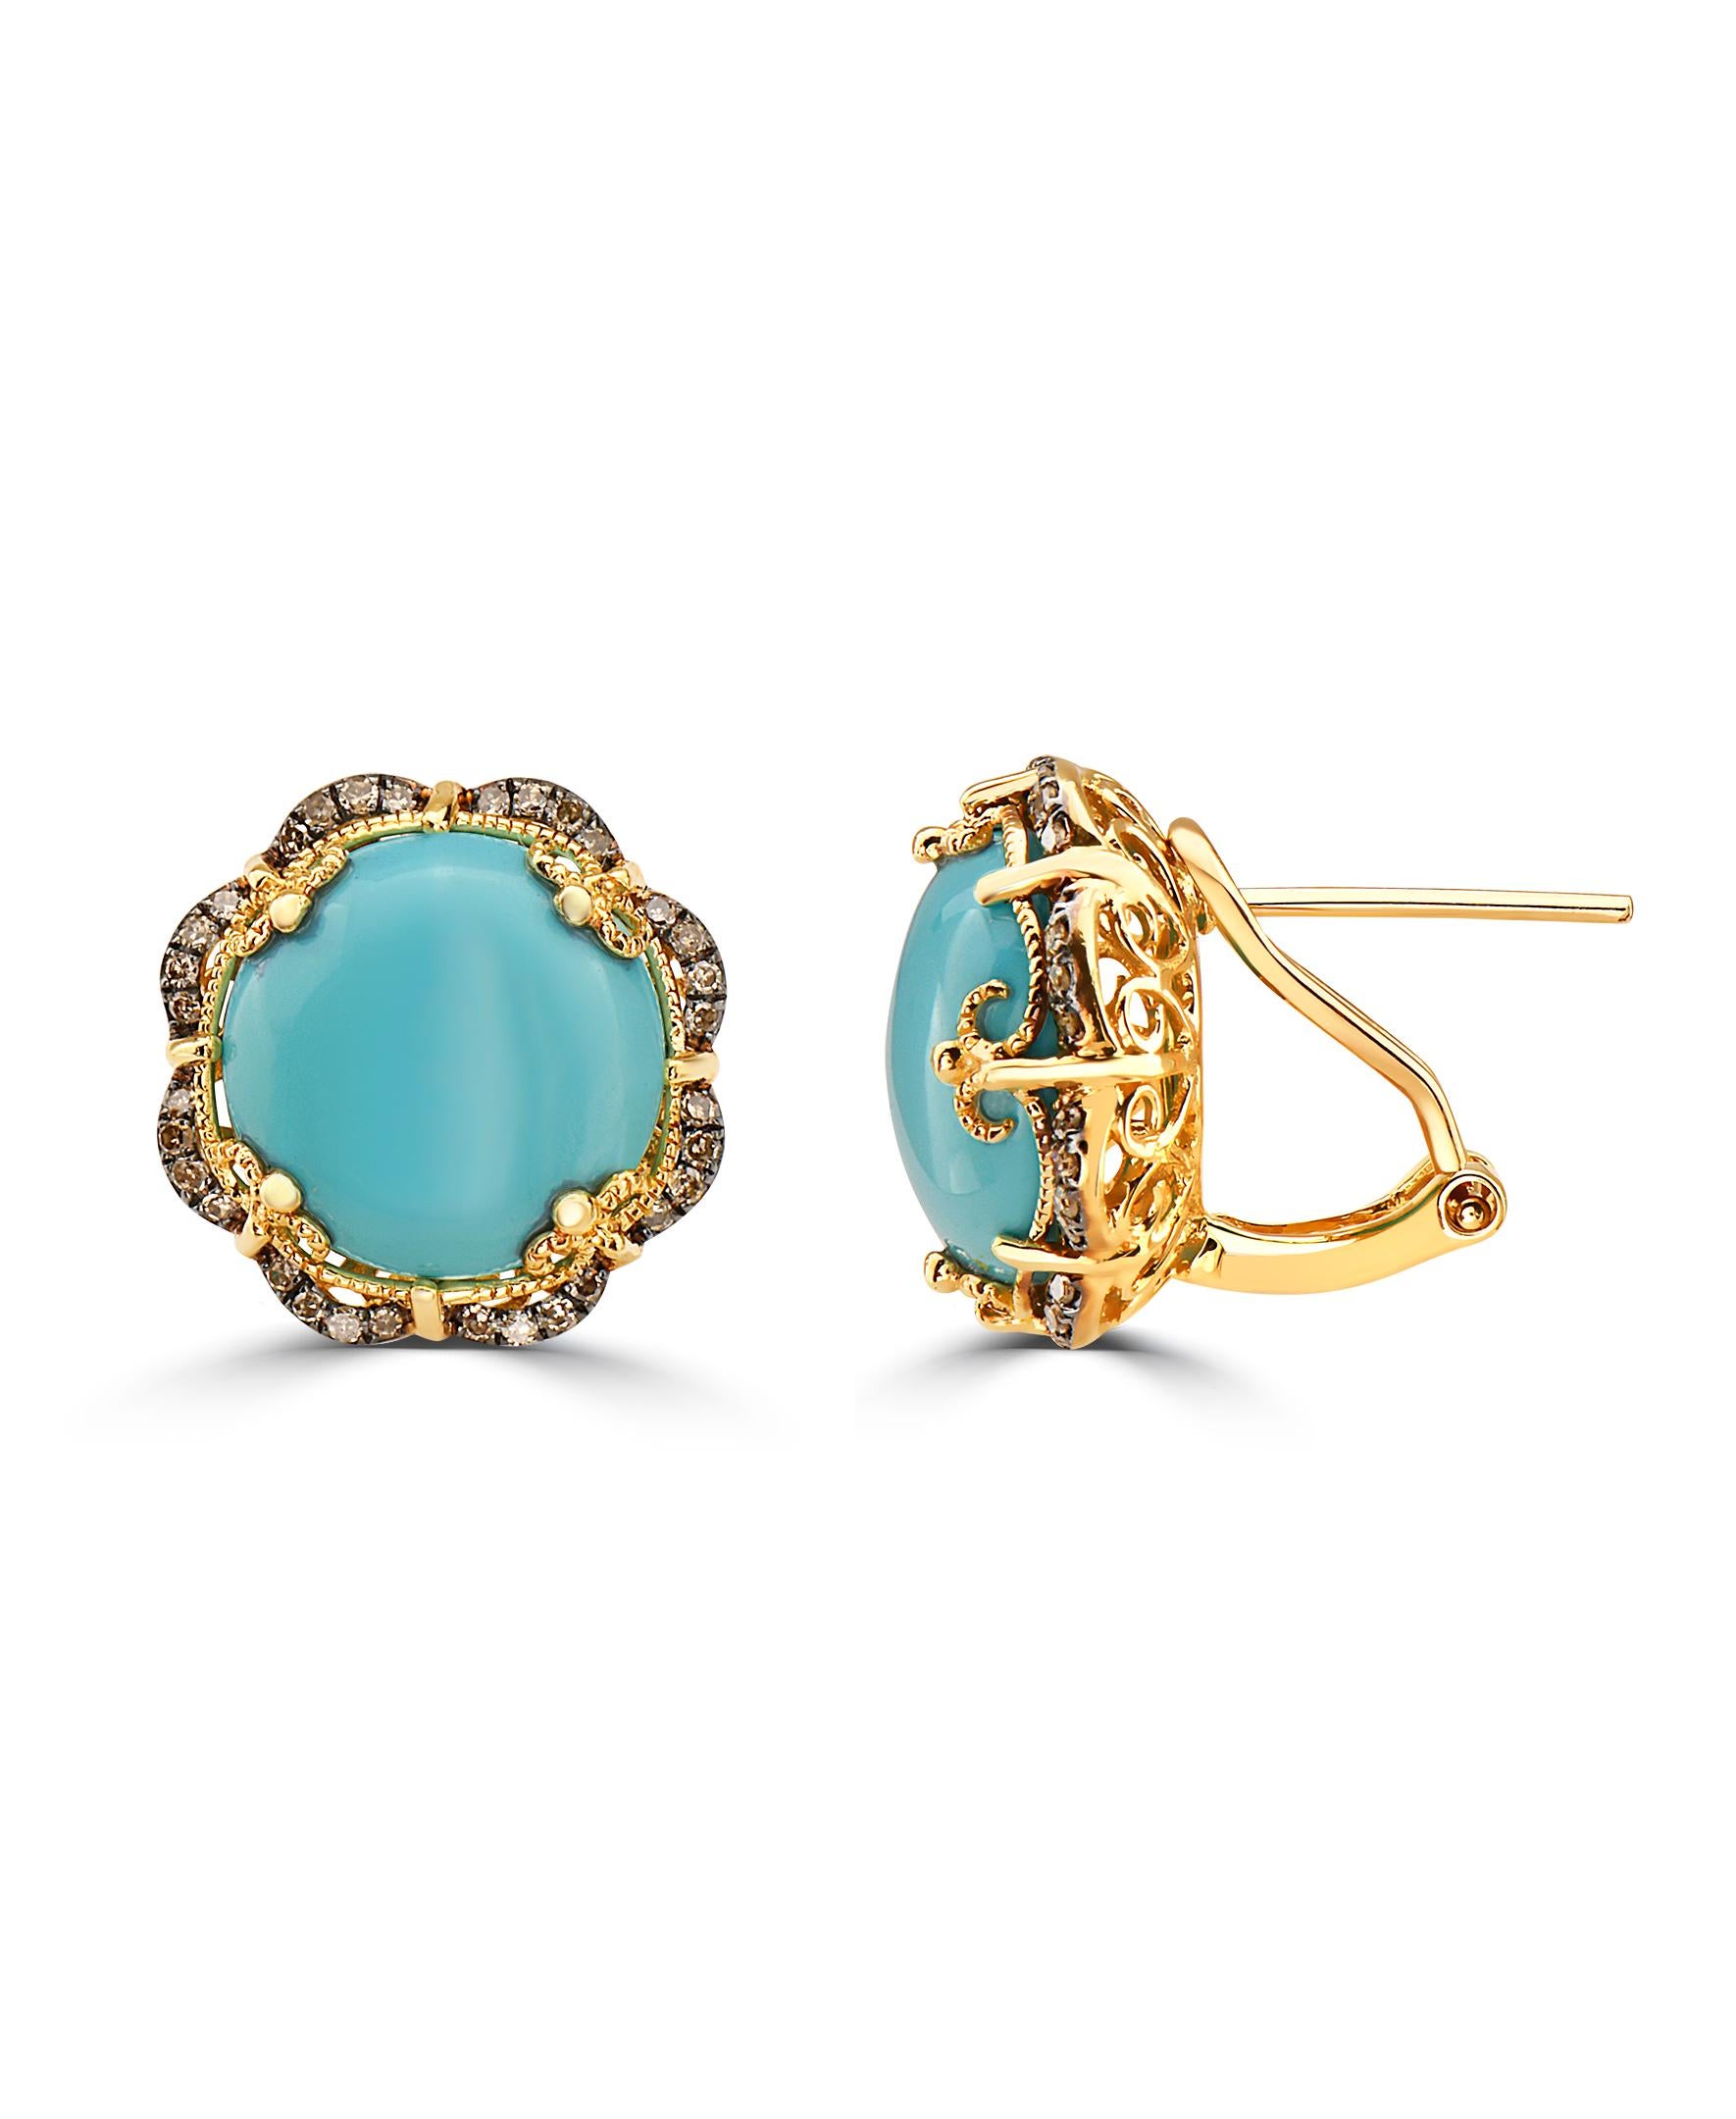 These Effy design earrings feature brown diamonds and Turquoise.

Total diamond weight 0.31ct. Total Turquoise weight is 11.40ct.

Item number F568.